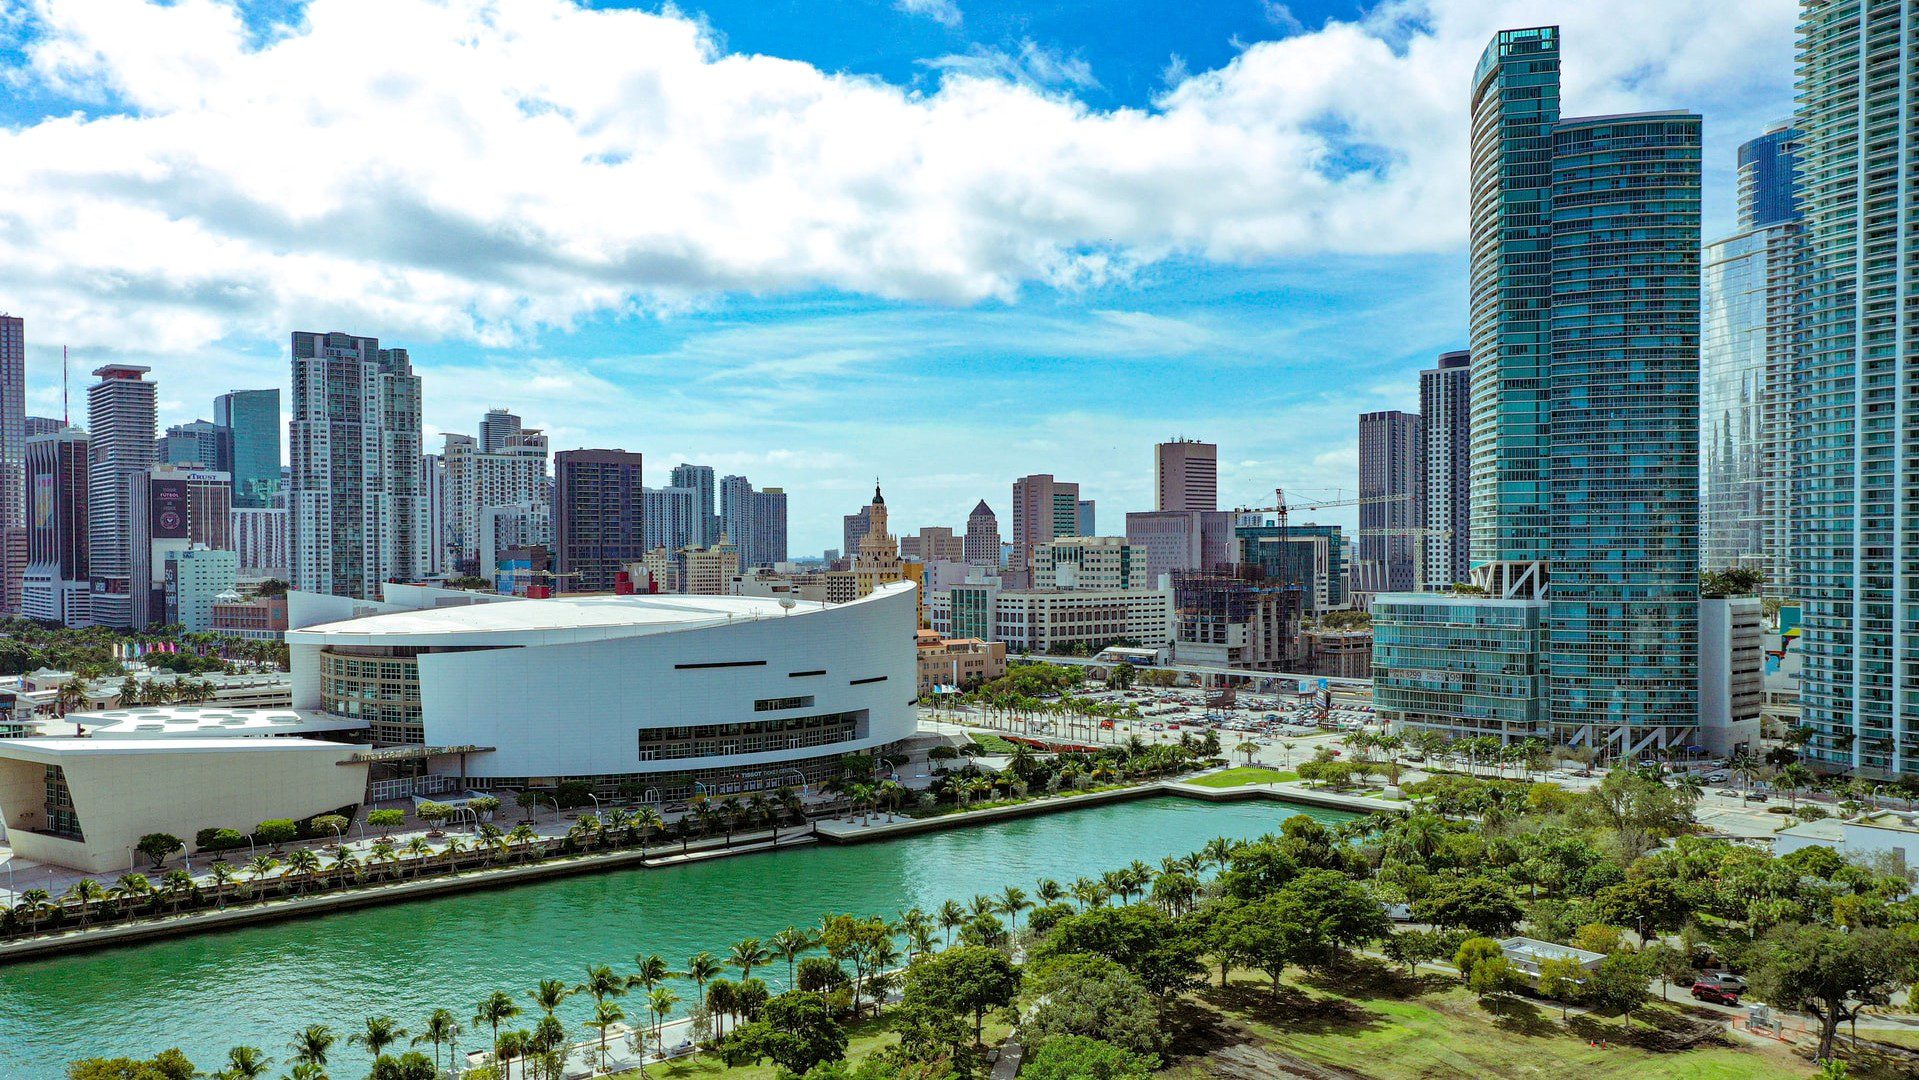 There’s a reason why we’re hosting LibertyCon International in Miami. Here are some of our top reasons to visit Miami this October!